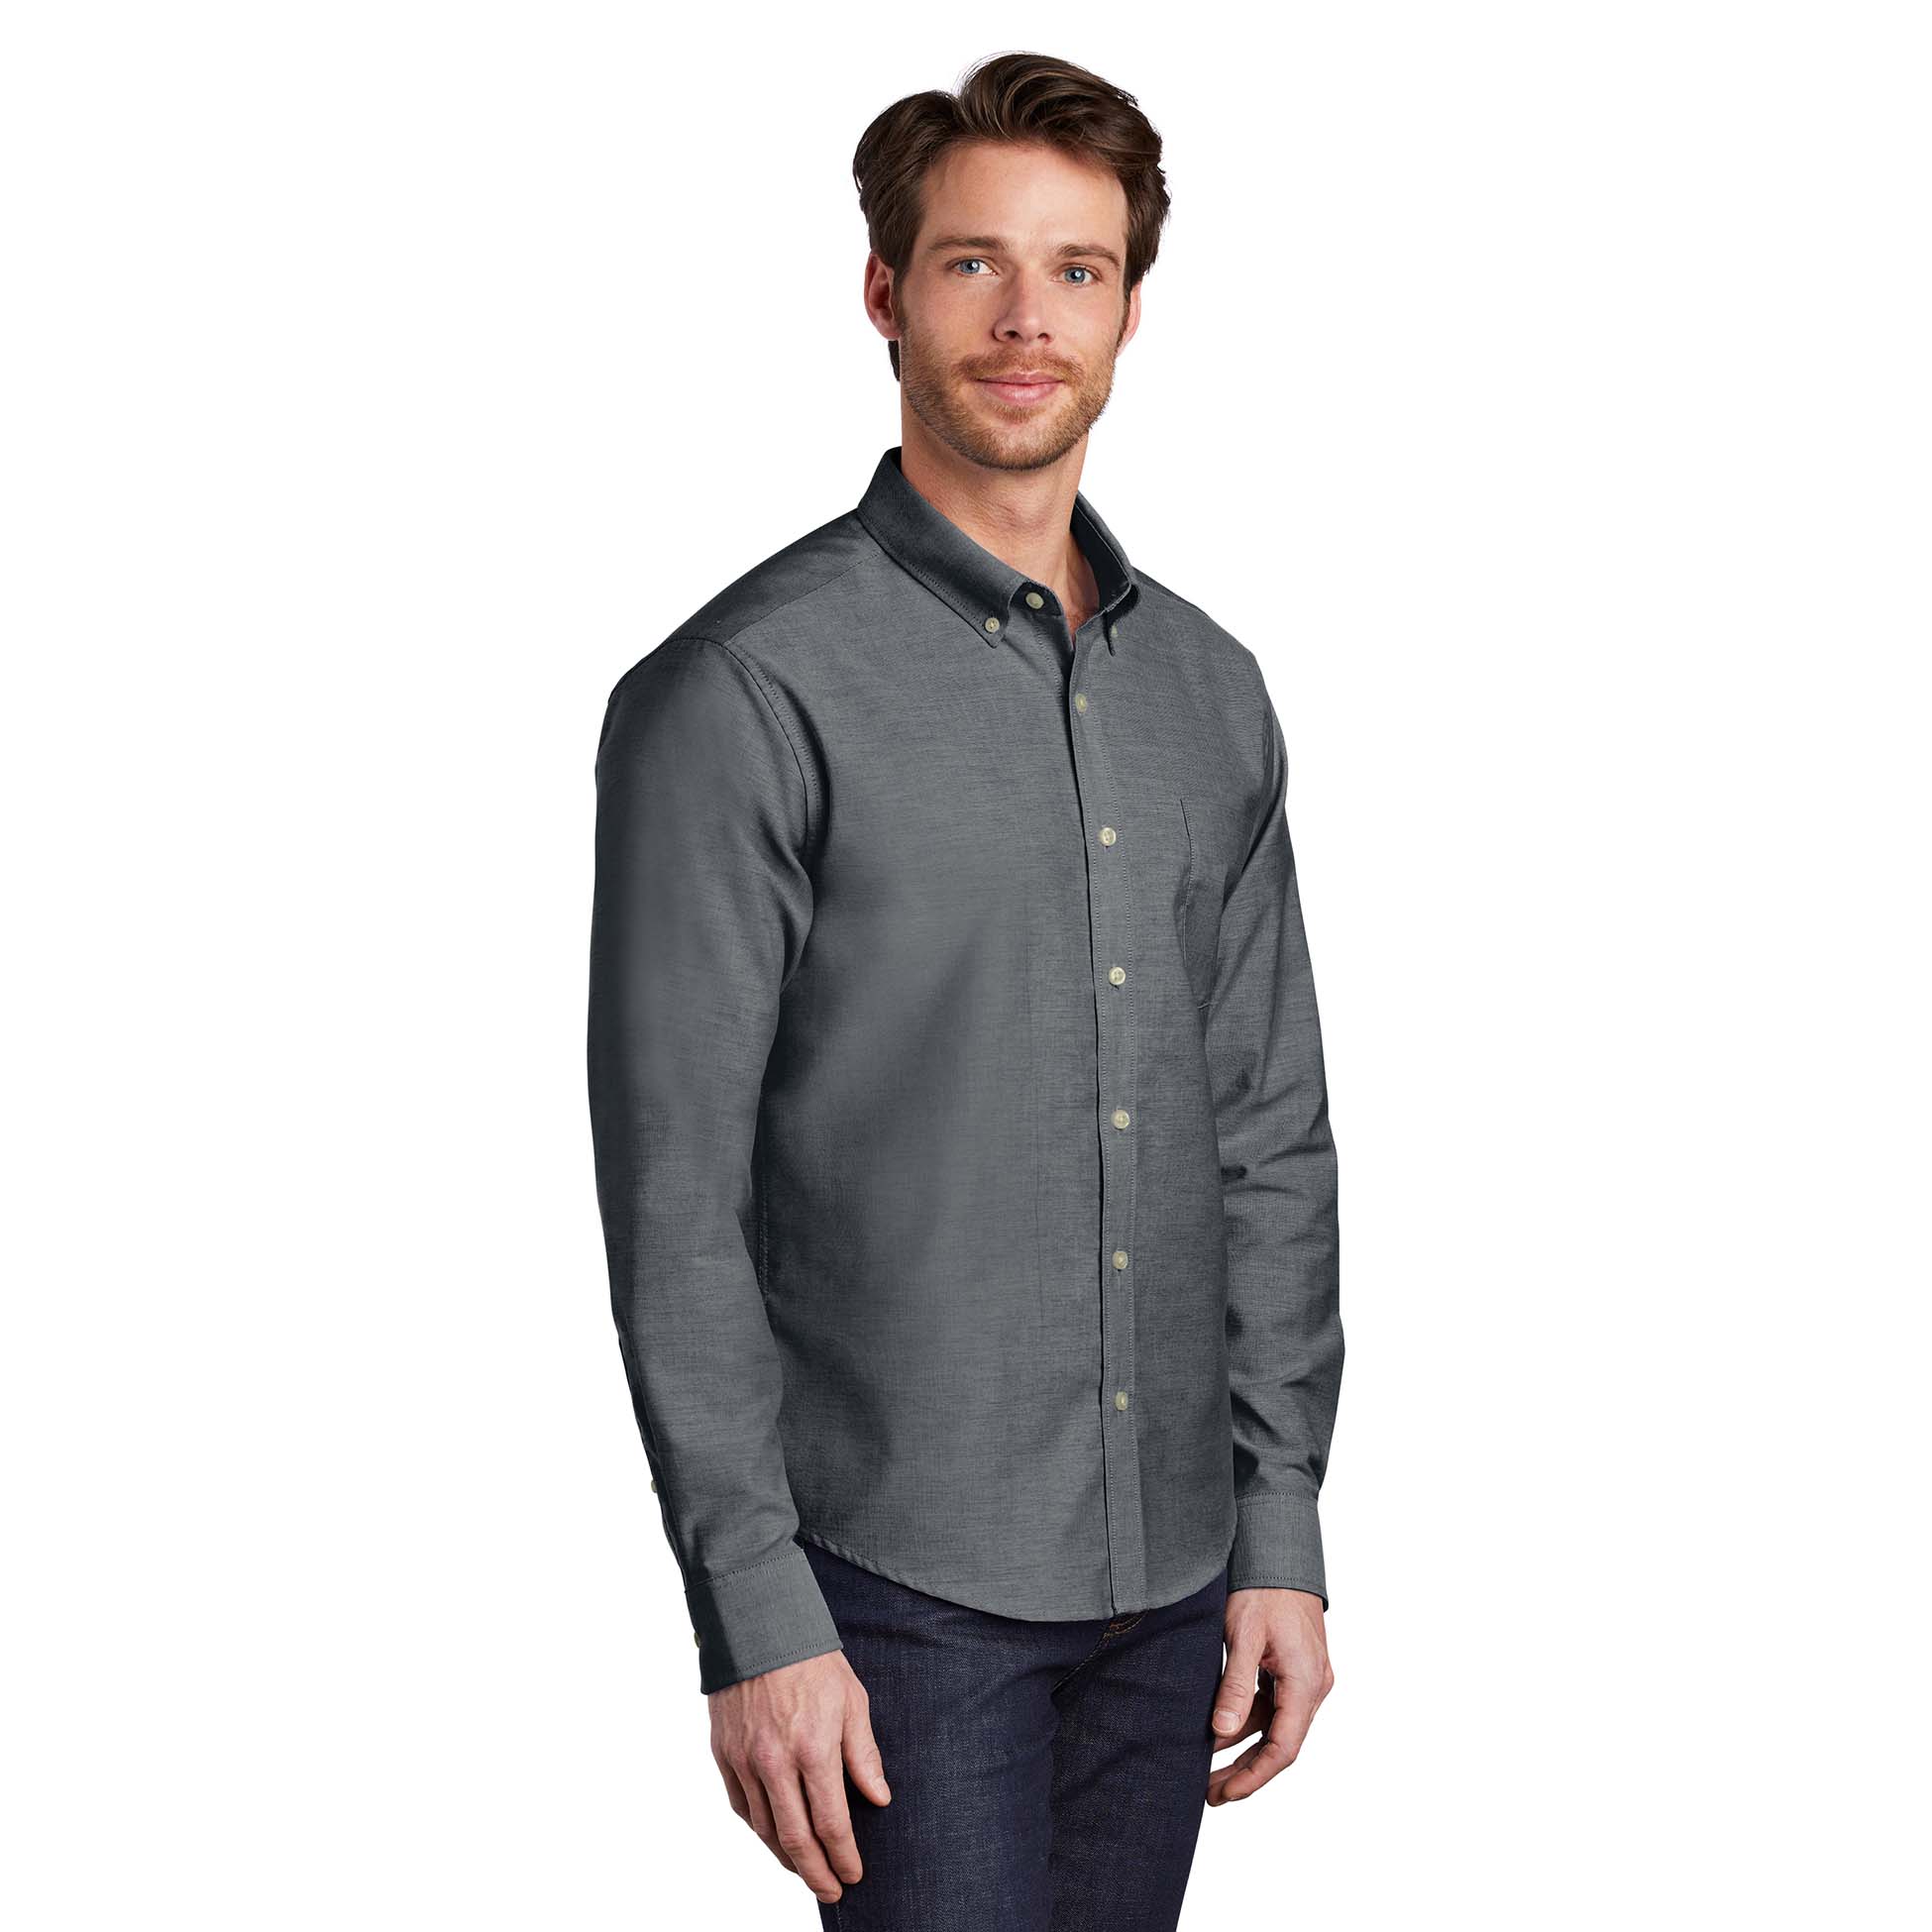 Port Authority S651 Untucked Fit SuperPro Oxford Shirt - Black | Full ...